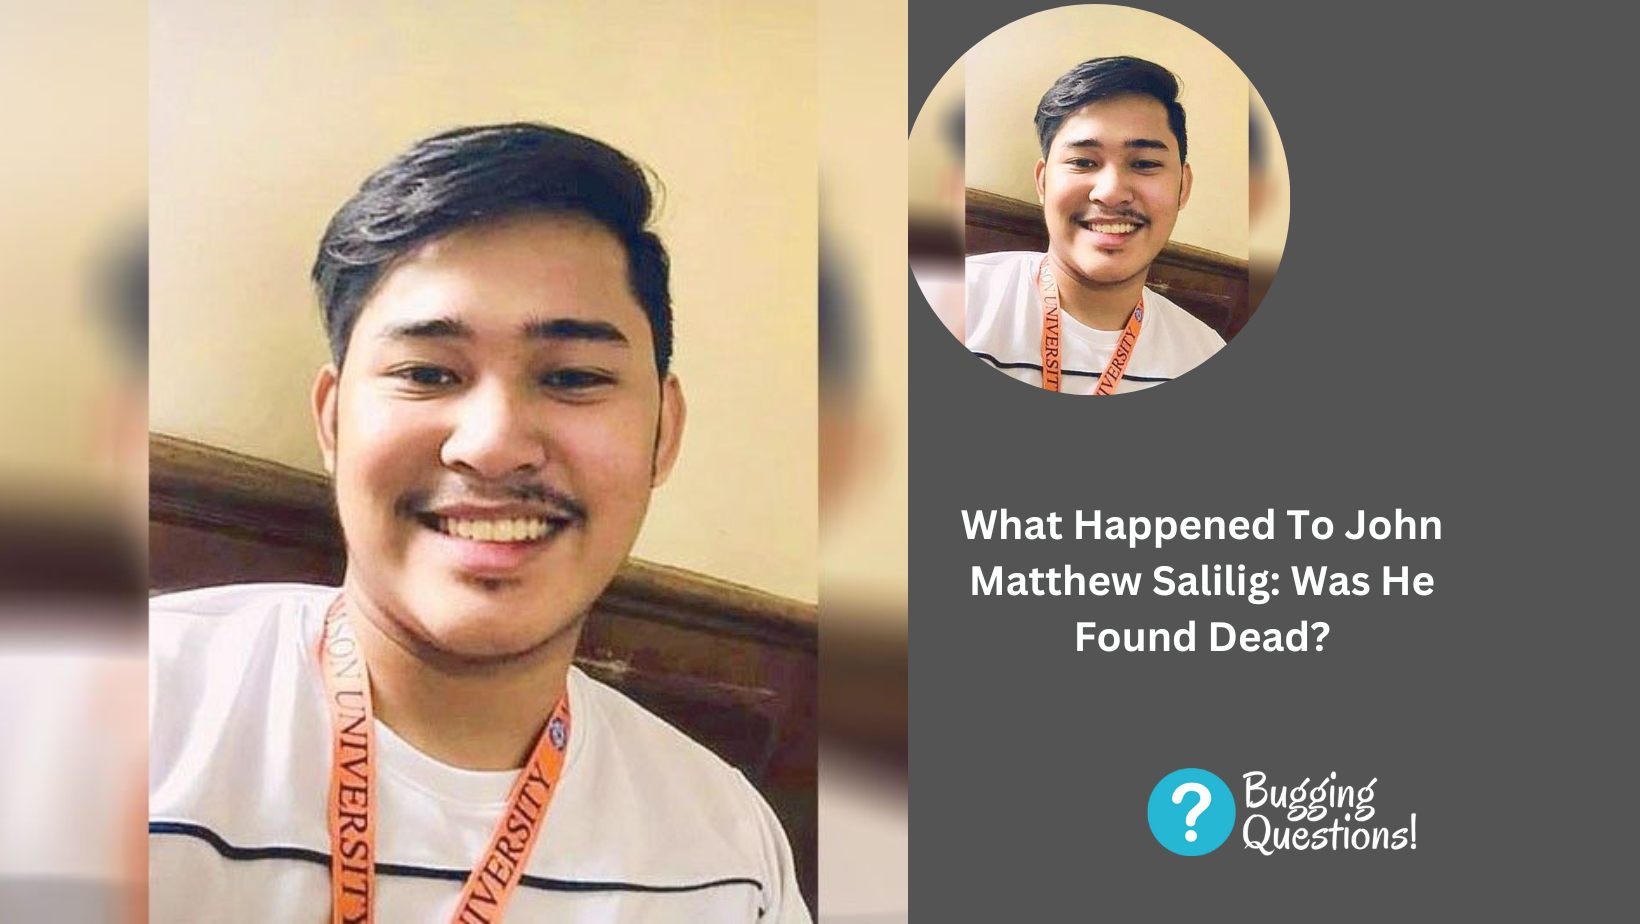 What Happened To John Matthew Salilig: Was He Found Dead?